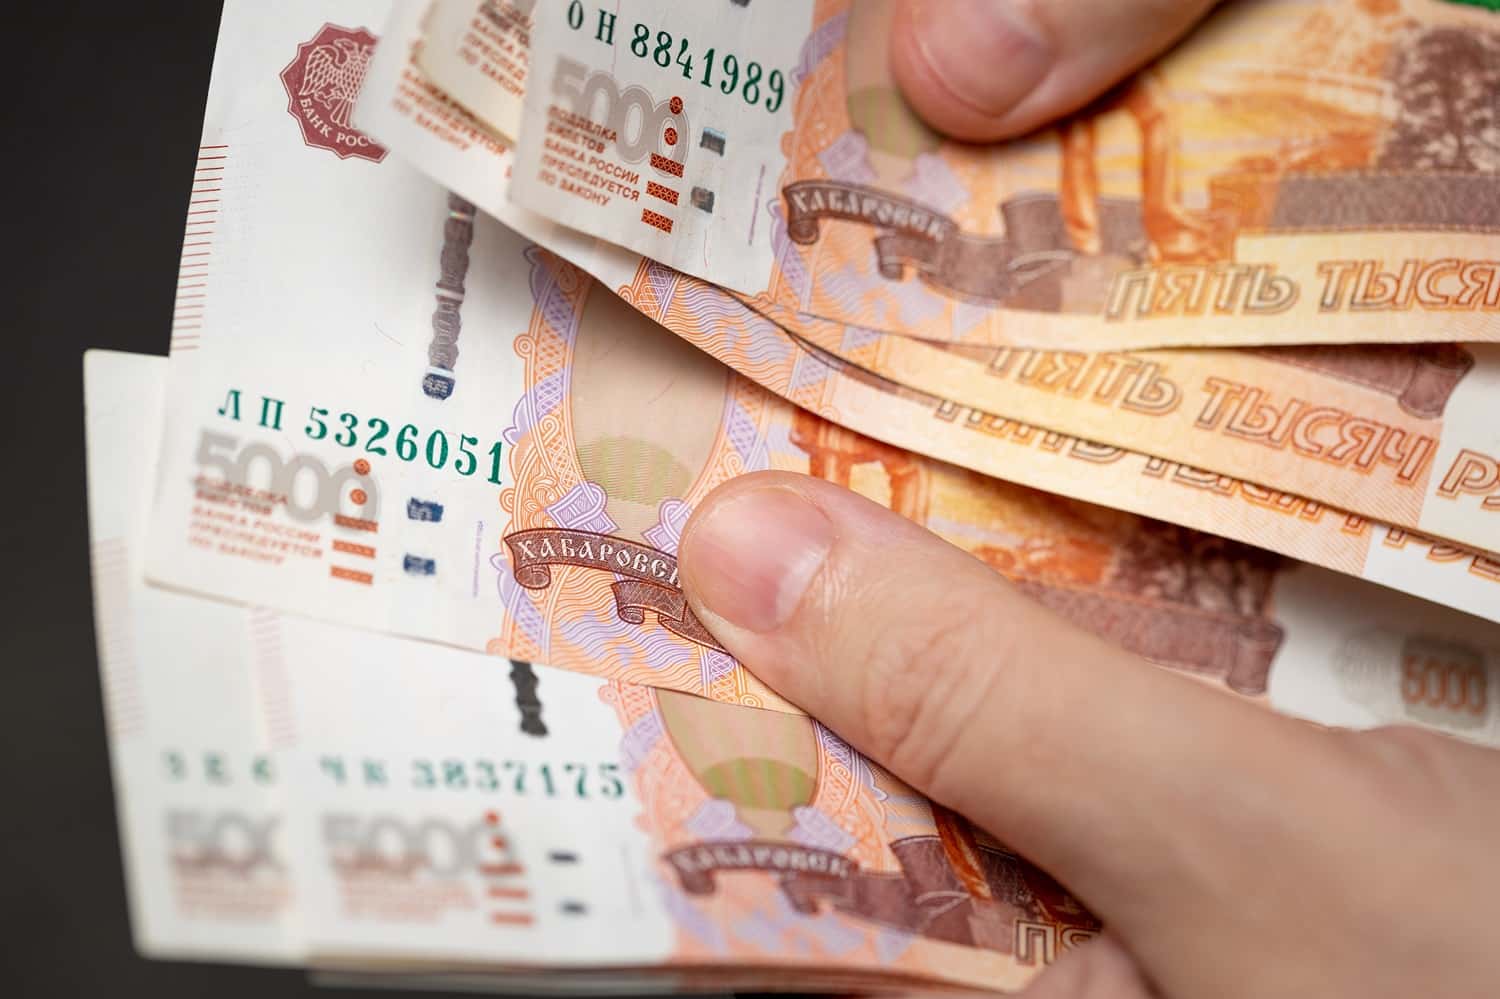 A person’s hands hold several five thousand Russian ruble banknotes.